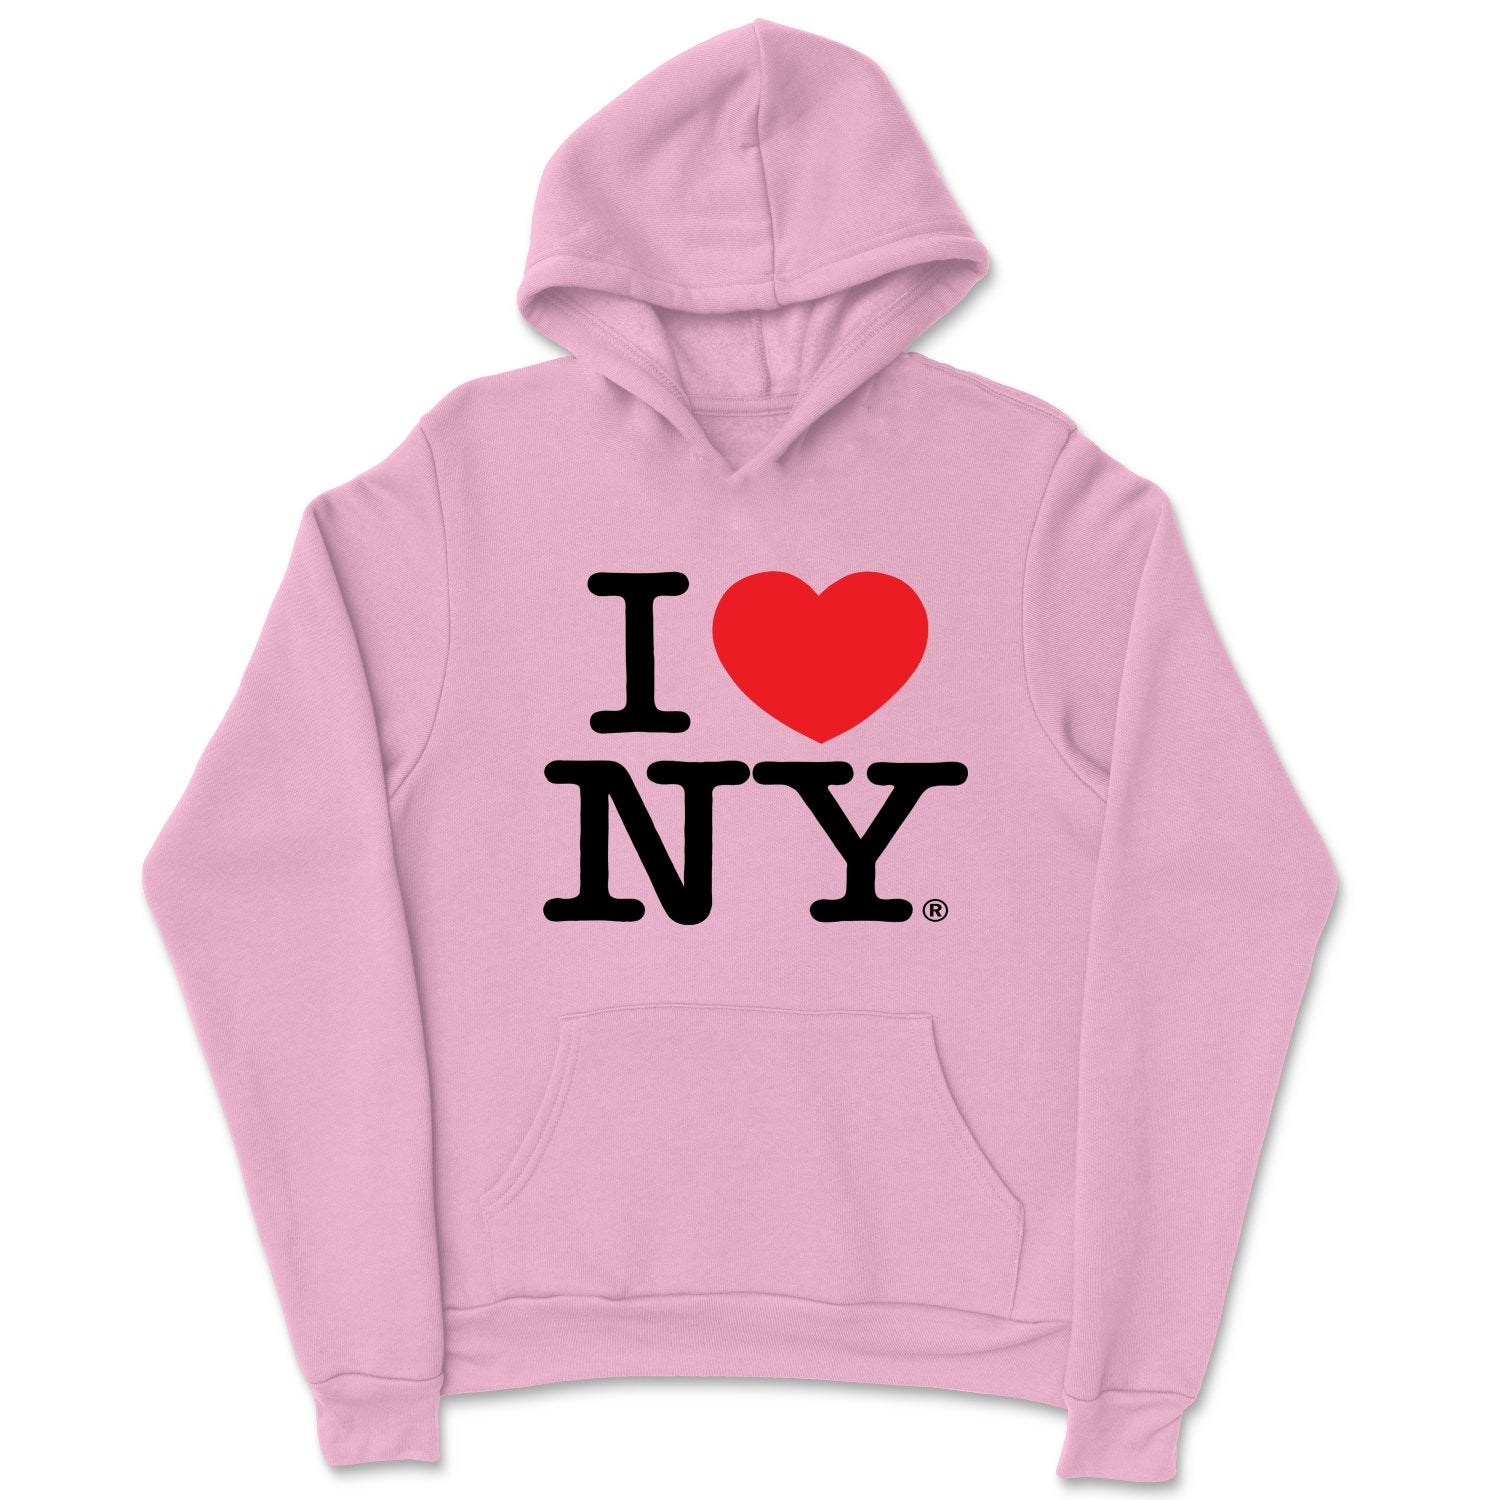 I Love NY Kids Hoodie Sweatshirt Officially Licensed (Youth, Light Pink)